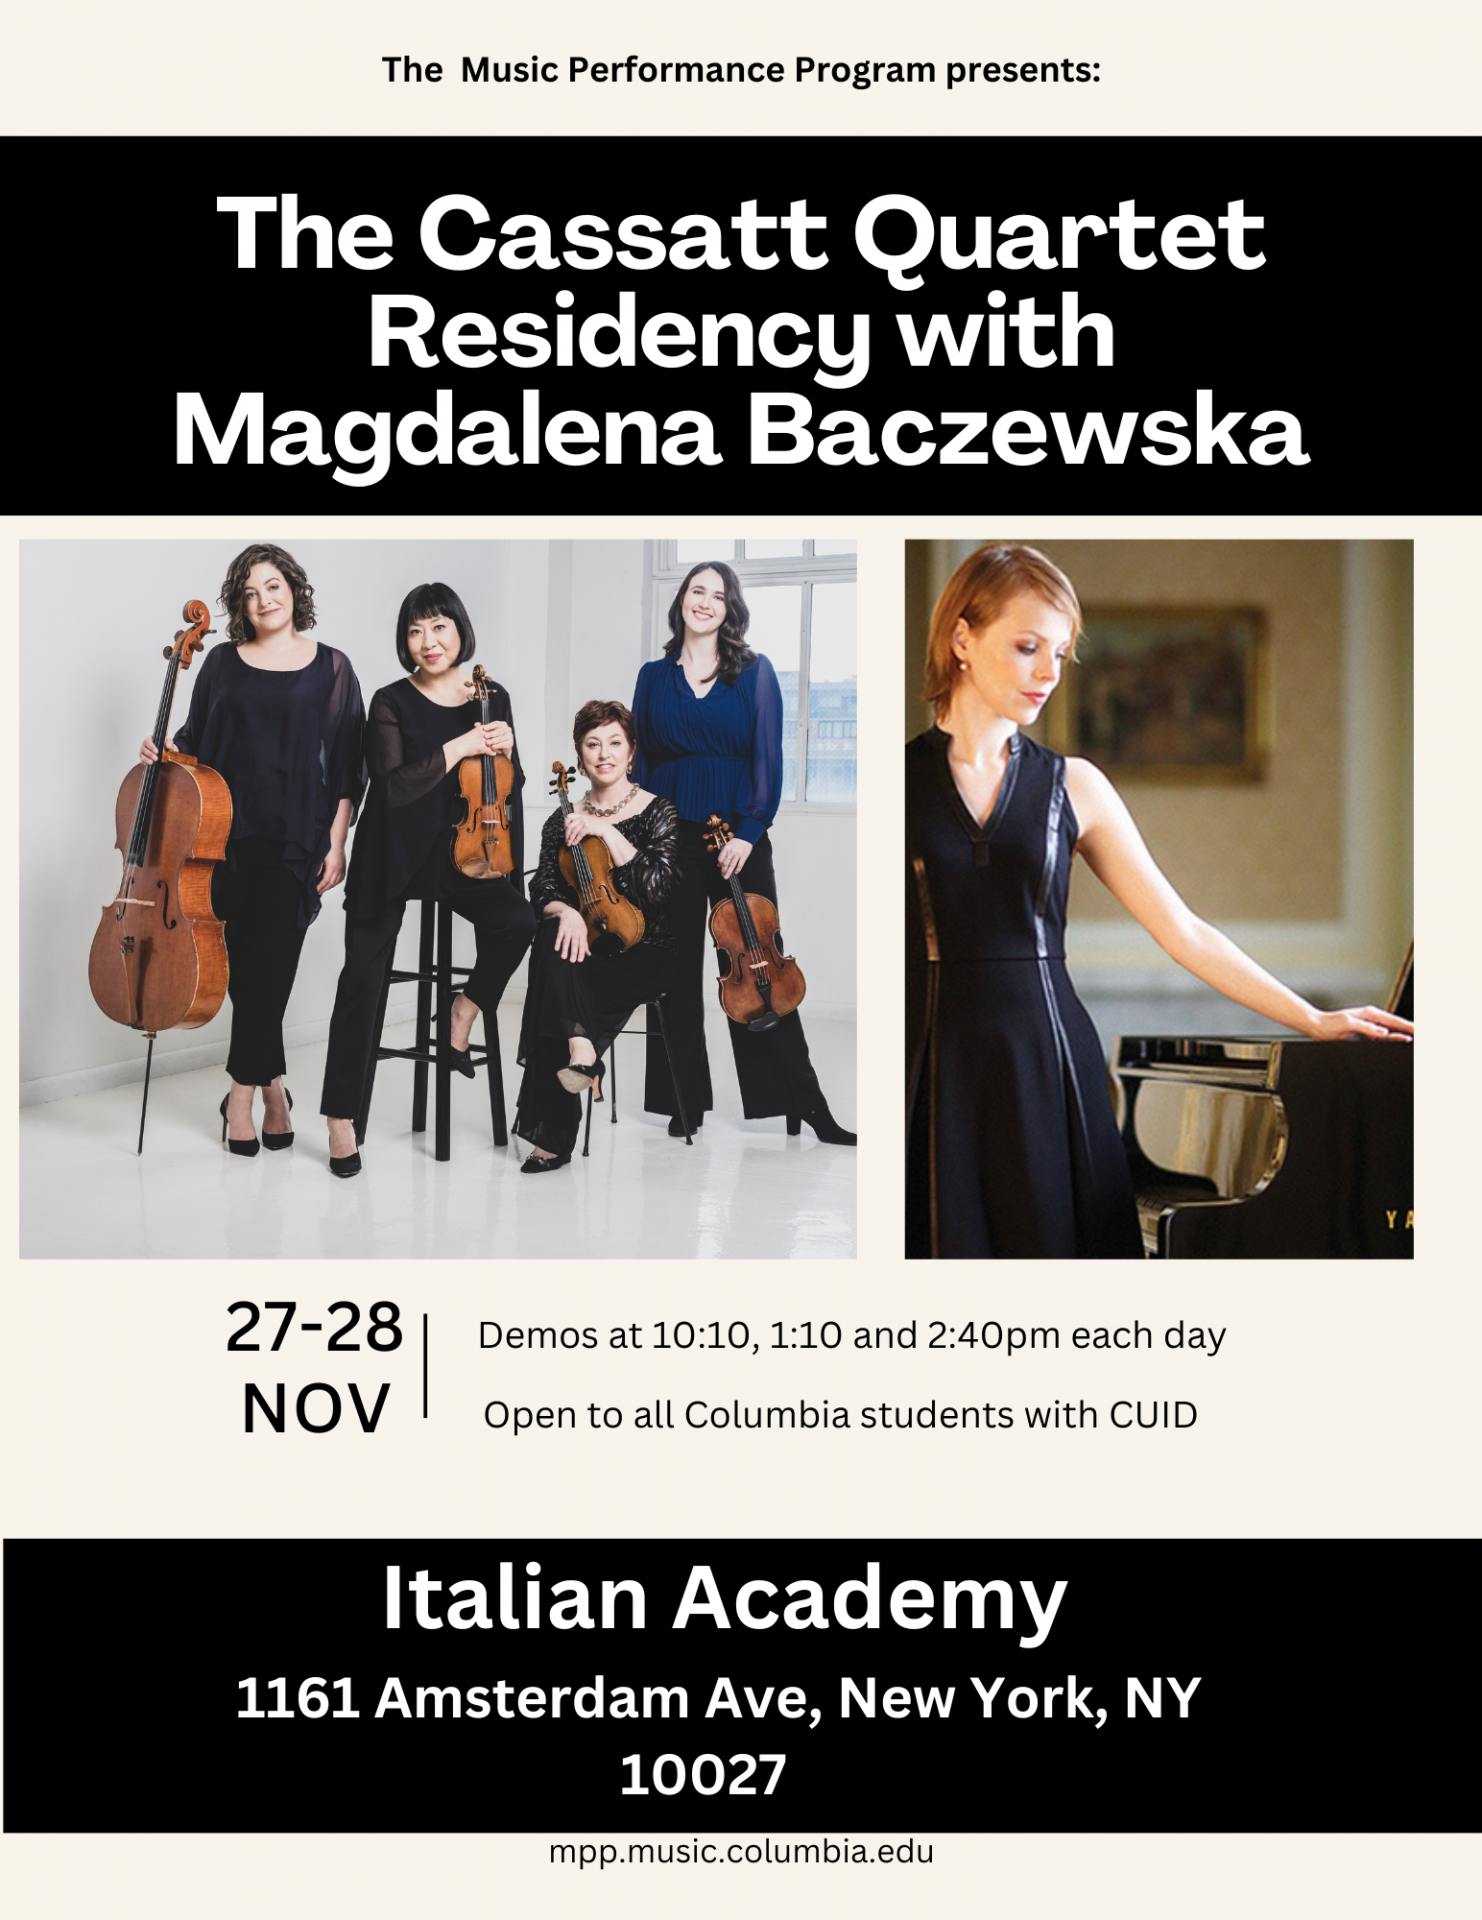 Flyer for Cassatt Quartet Residency with Magdalena Baczewska, that says, "Demos at 10:10, 1:10, and 2:40pm each day" for 11/27/23 and 11/28/23. Photo of the Cassatt Quartet, and Magdalena Baczewska next to a piano.